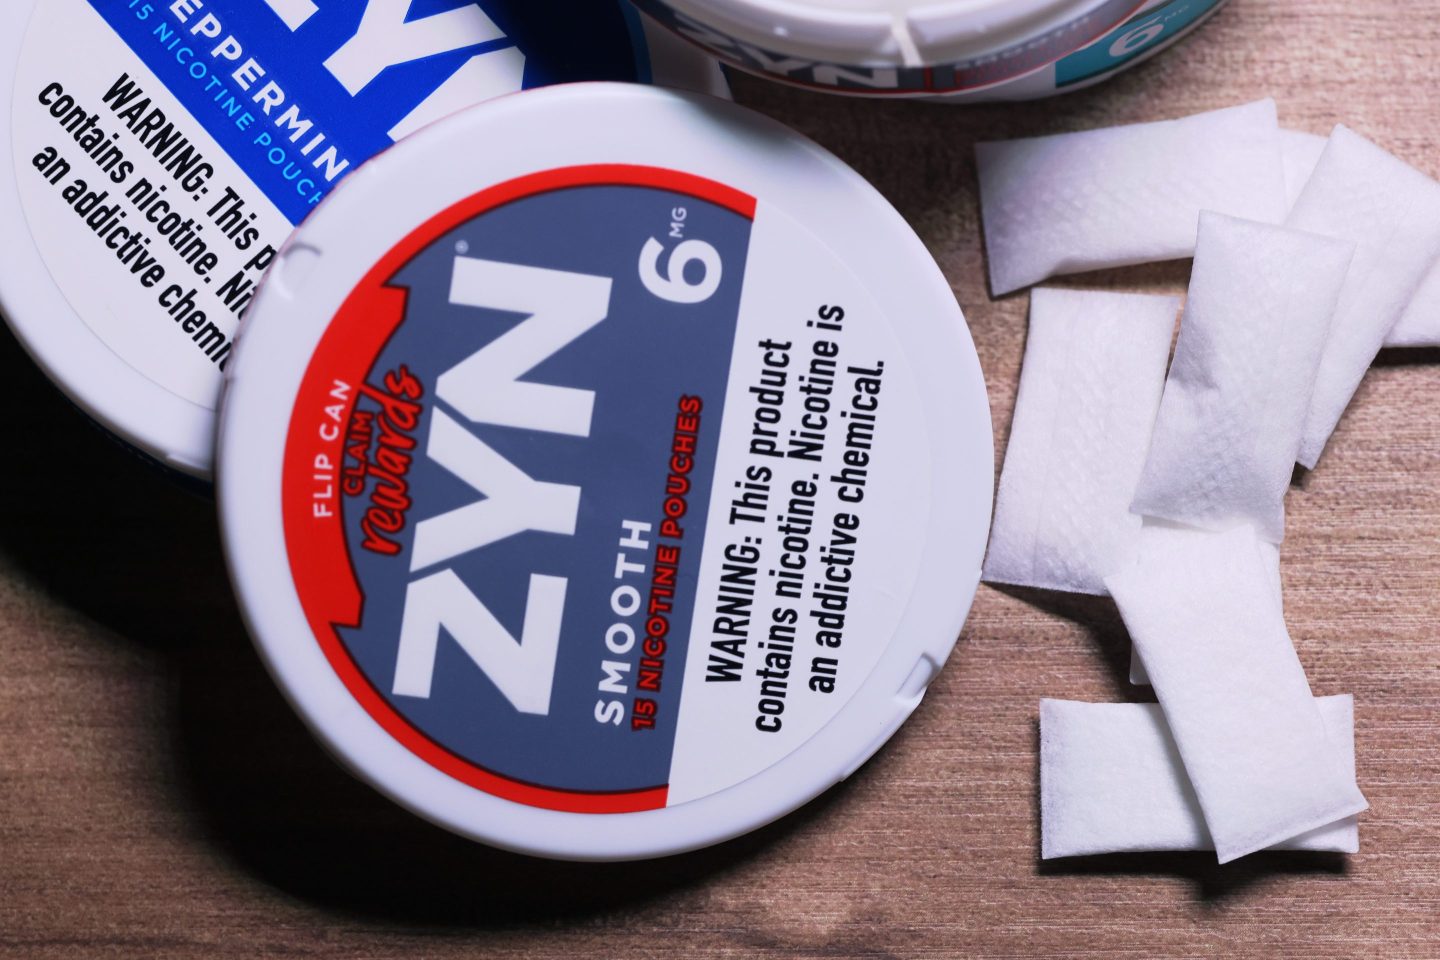 white Zyn nicotine pouches next to round can labeled "Zyn"